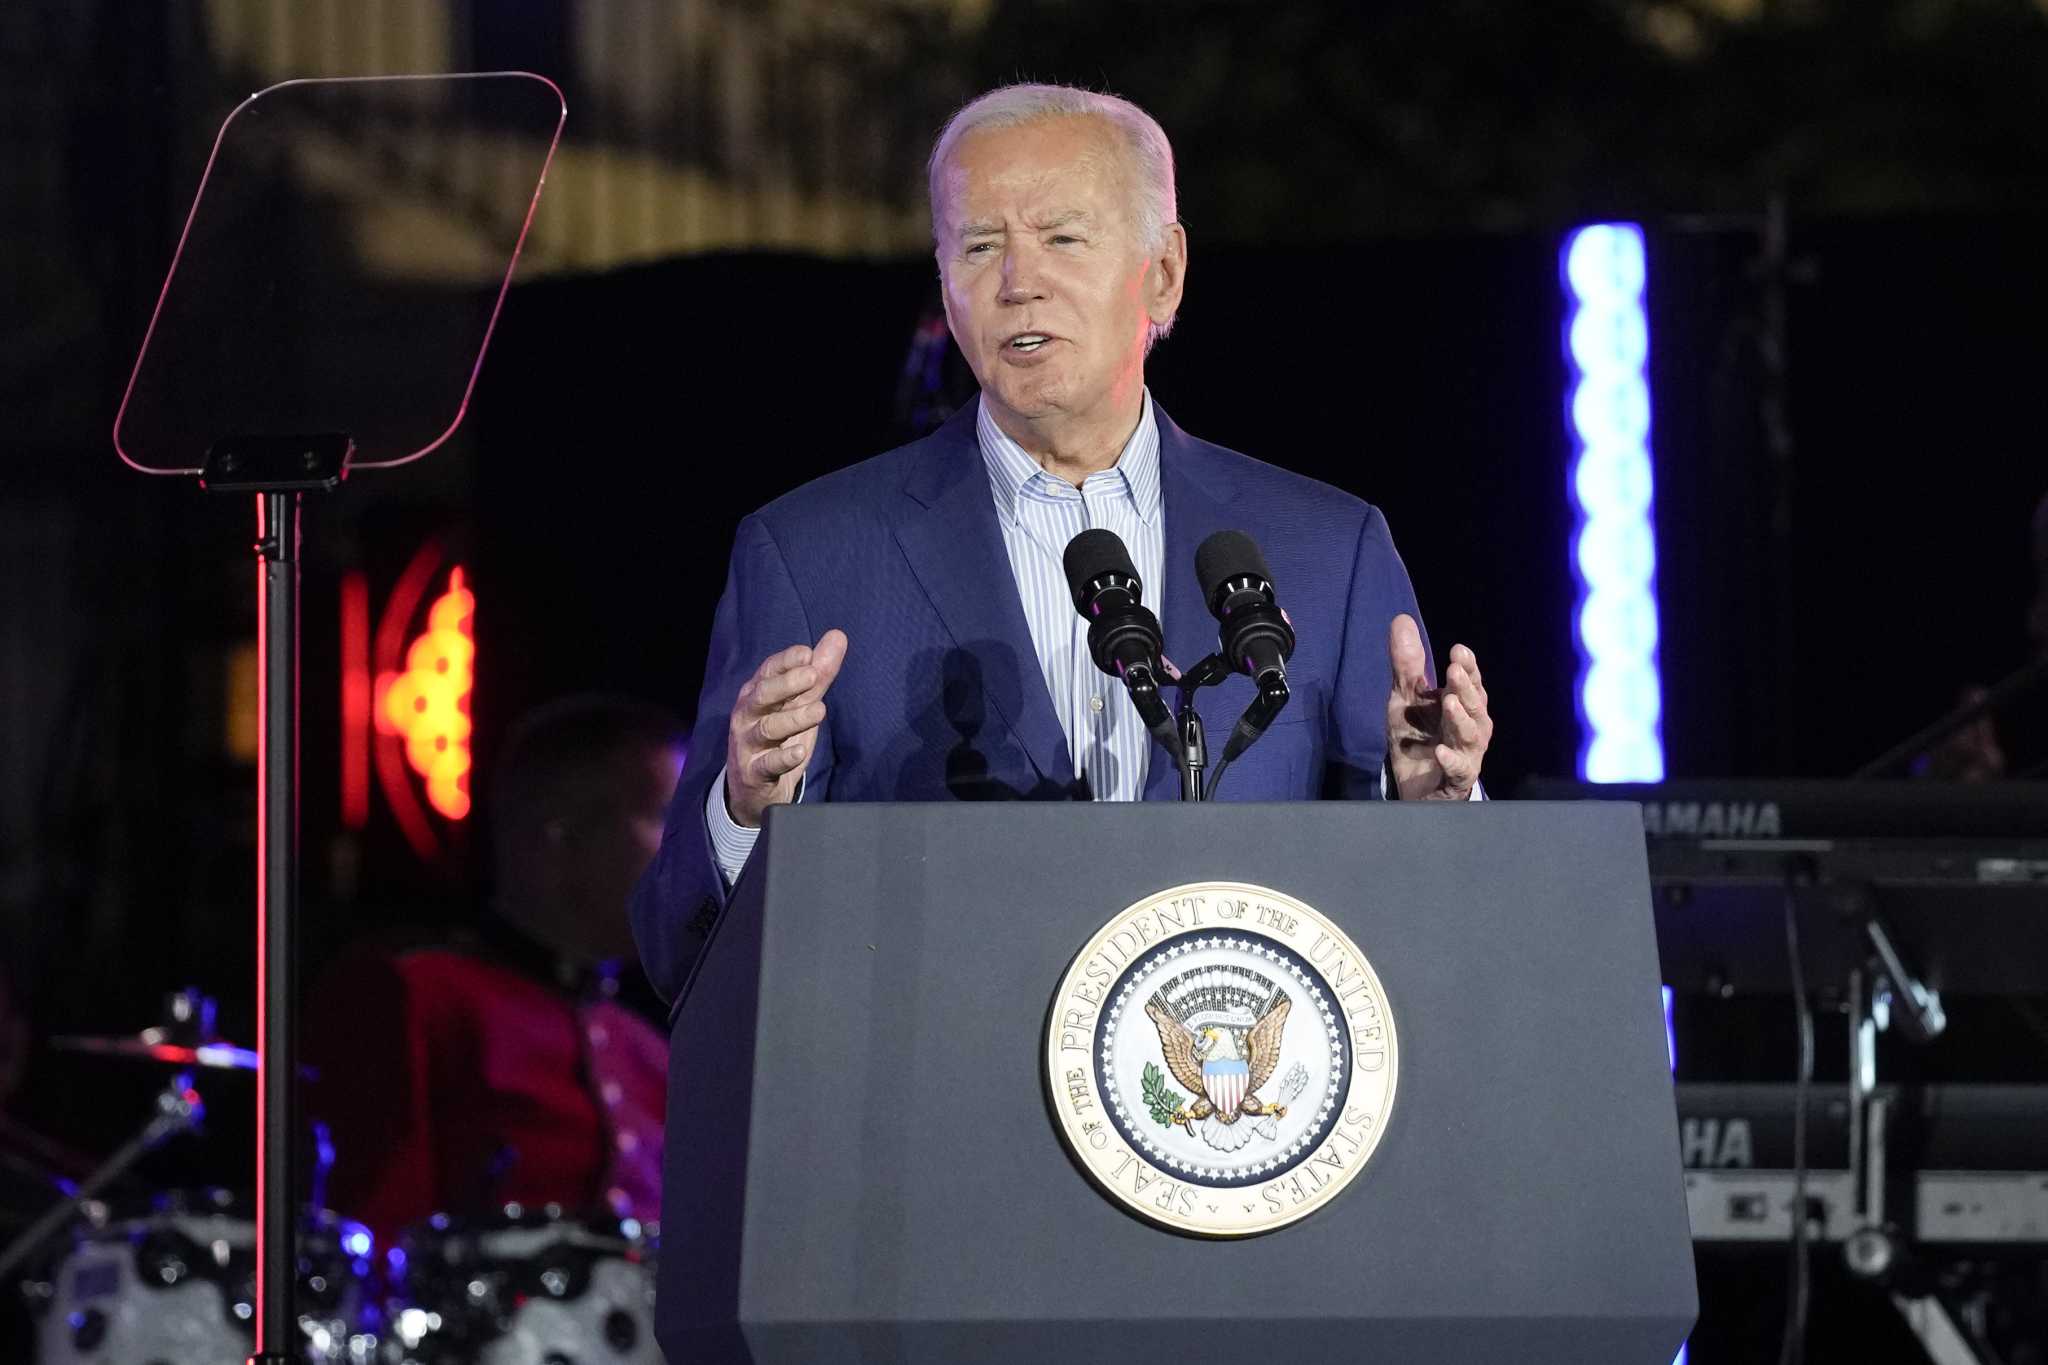 Poll finds world trusts Biden more than Trump, even as opinion of US democracy declines